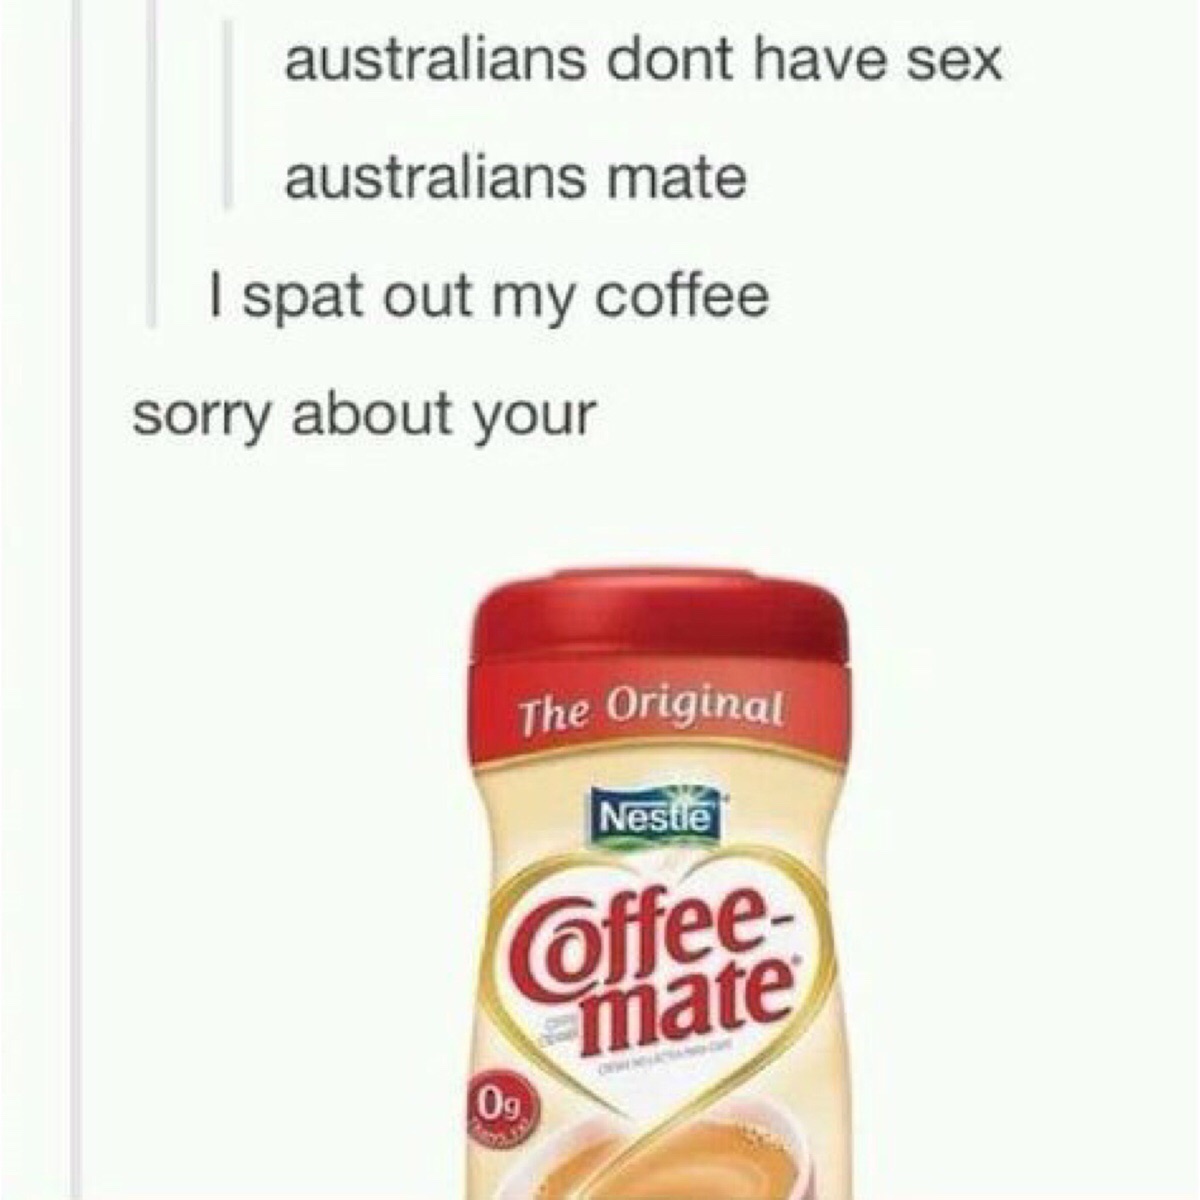 memes - coffee mate - australians dont have sex australians mate I spat out my coffee sorry about your The Original Nestle Offee mate